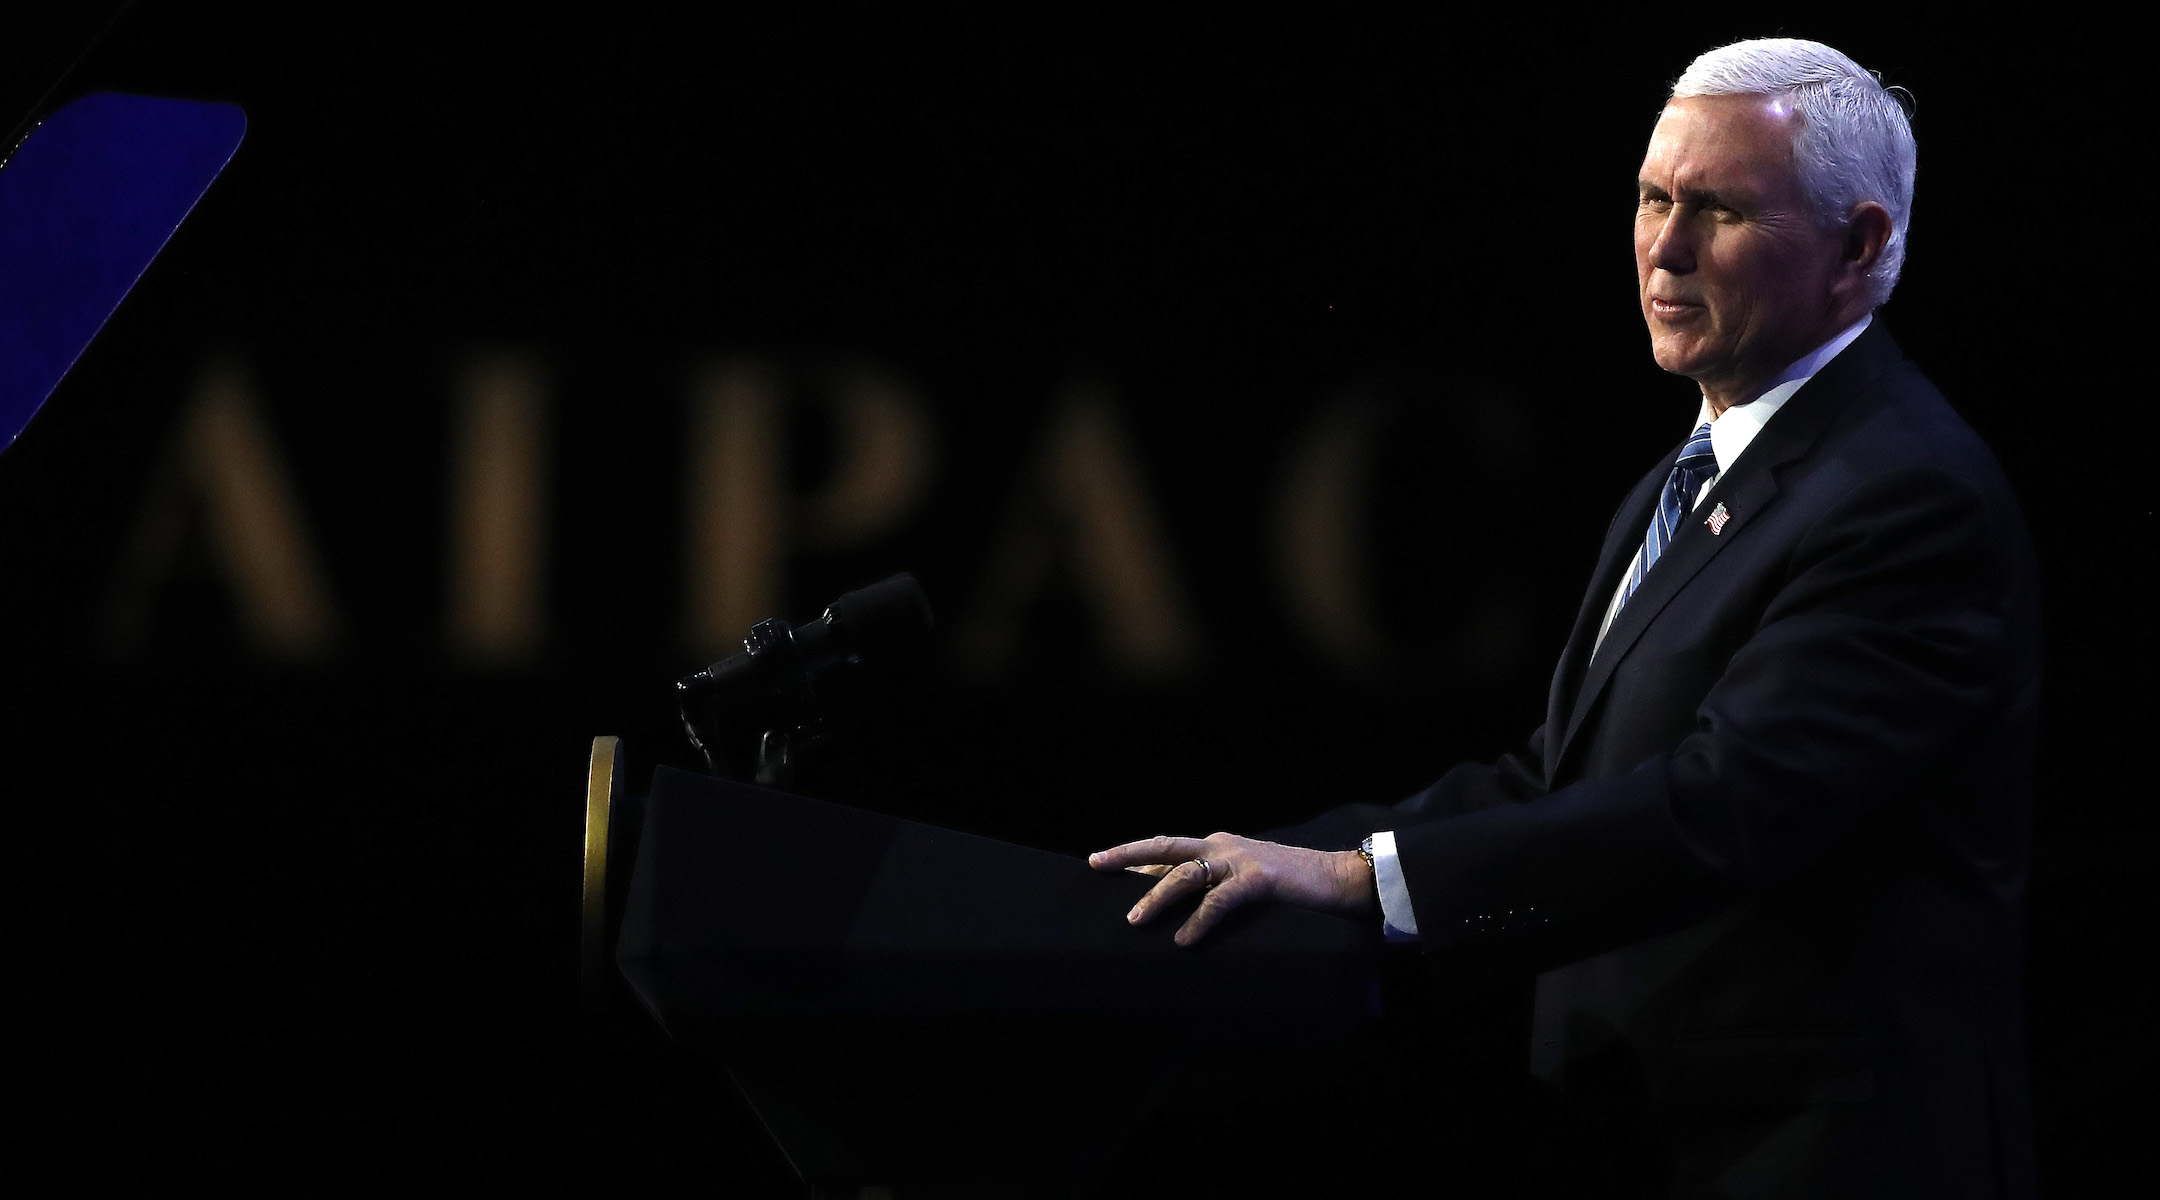 U.S. Vice President Mike Pence speaks during the American Israel Public Affairs Committee Policy Conference, on March 2, 2020 in Washington, DC. (Mark Wilson/Getty Images)